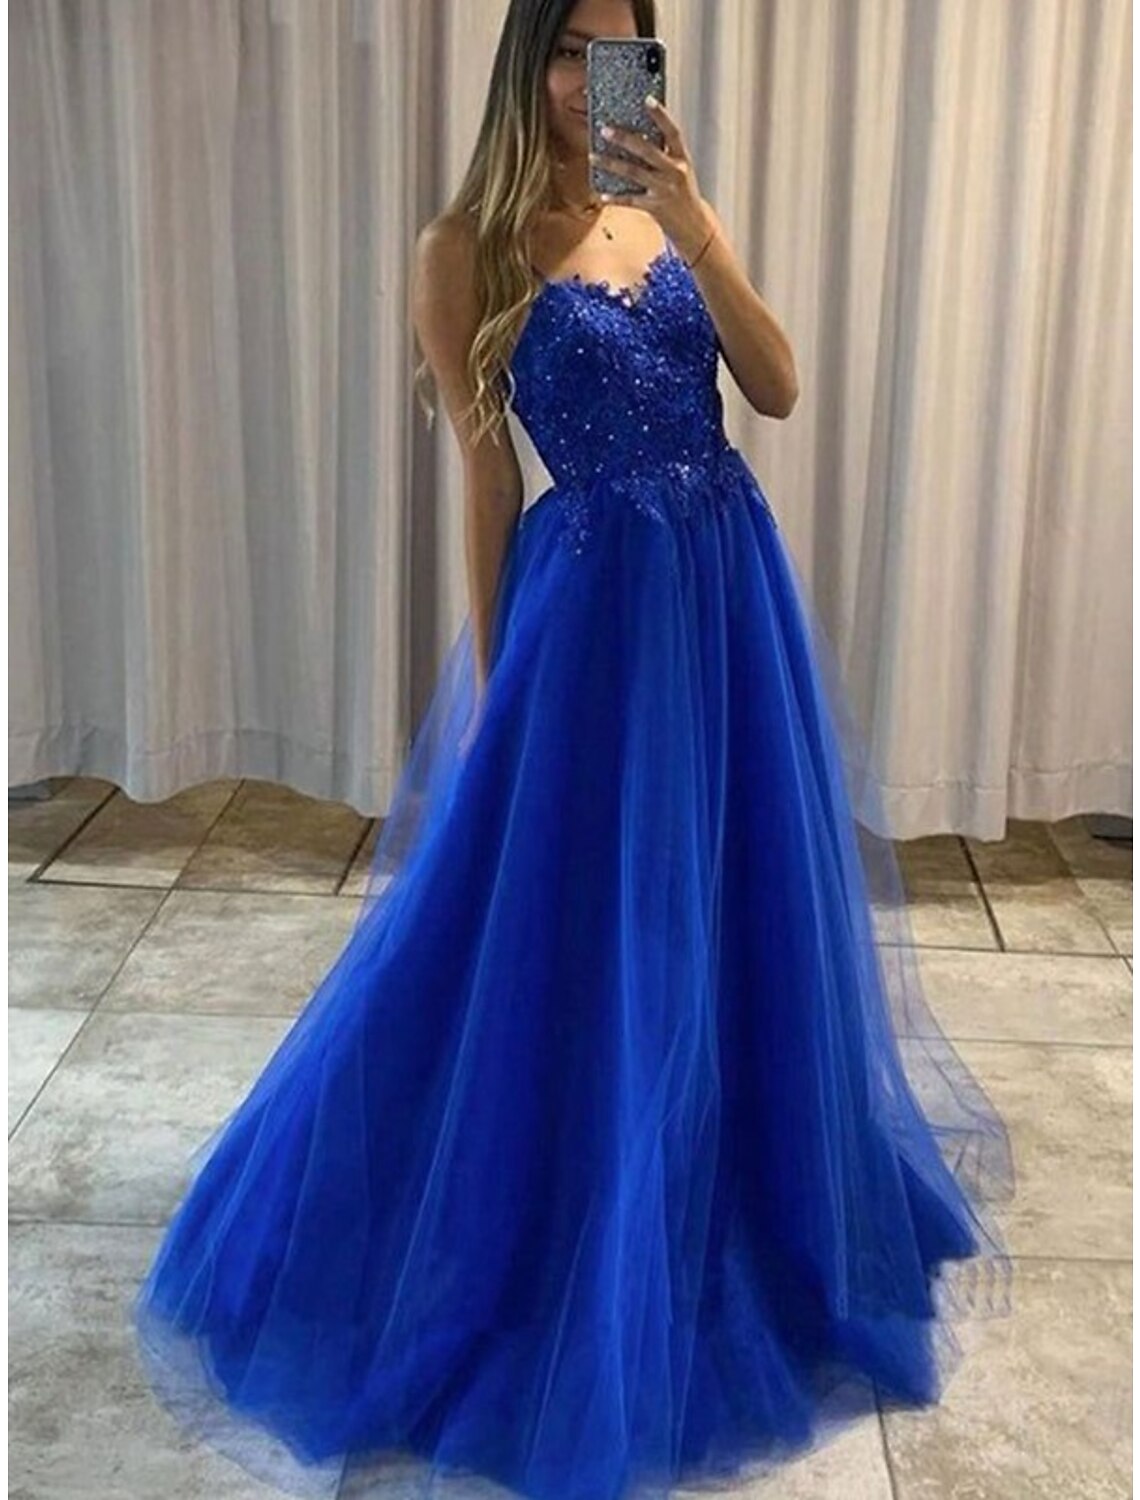 A-Line Prom Dresses Princess Dress Formal Floor Length Sleeveless Sweetheart Detachable Tulle Backless with Pleats Beading Appliques